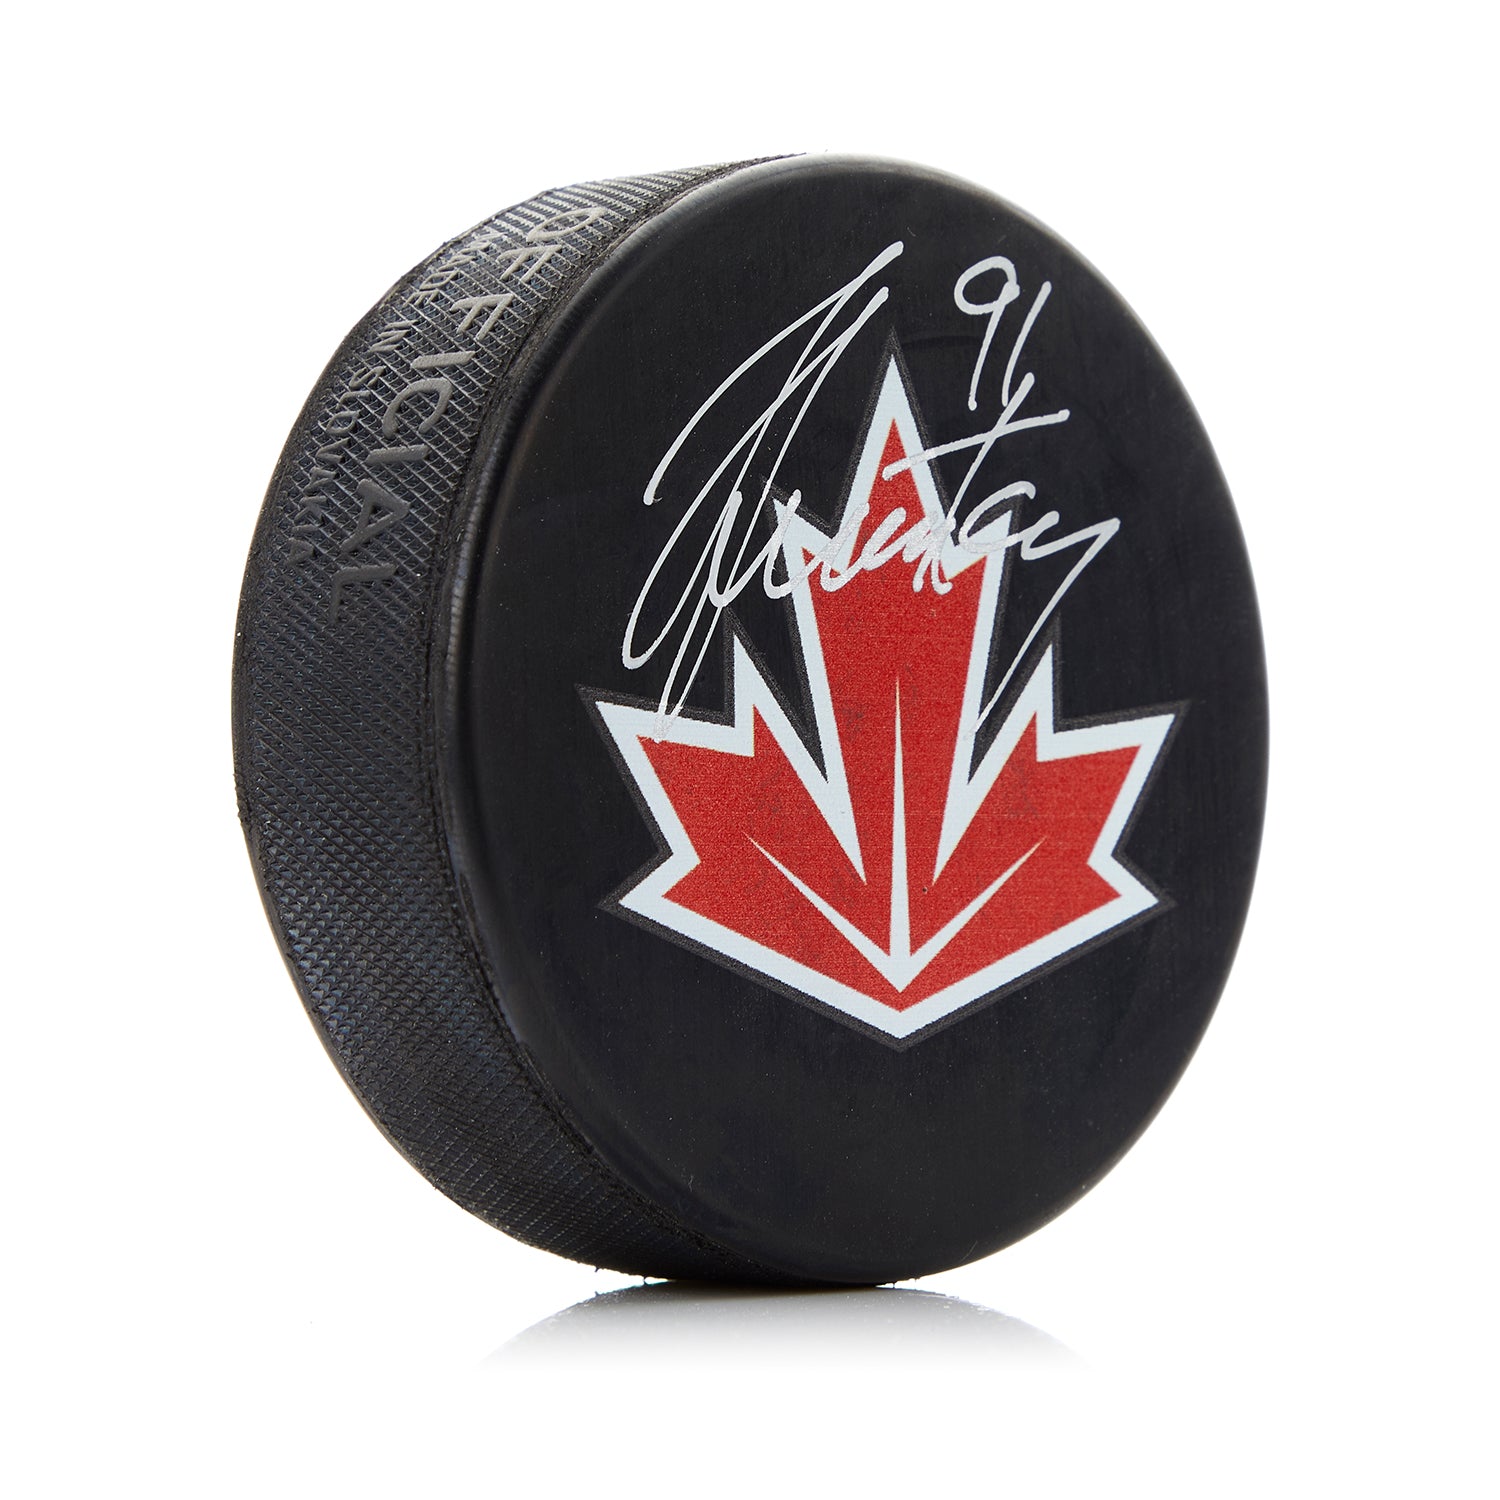 Steven Stamkos Signed Team Canada World Cup of Hockey Puck